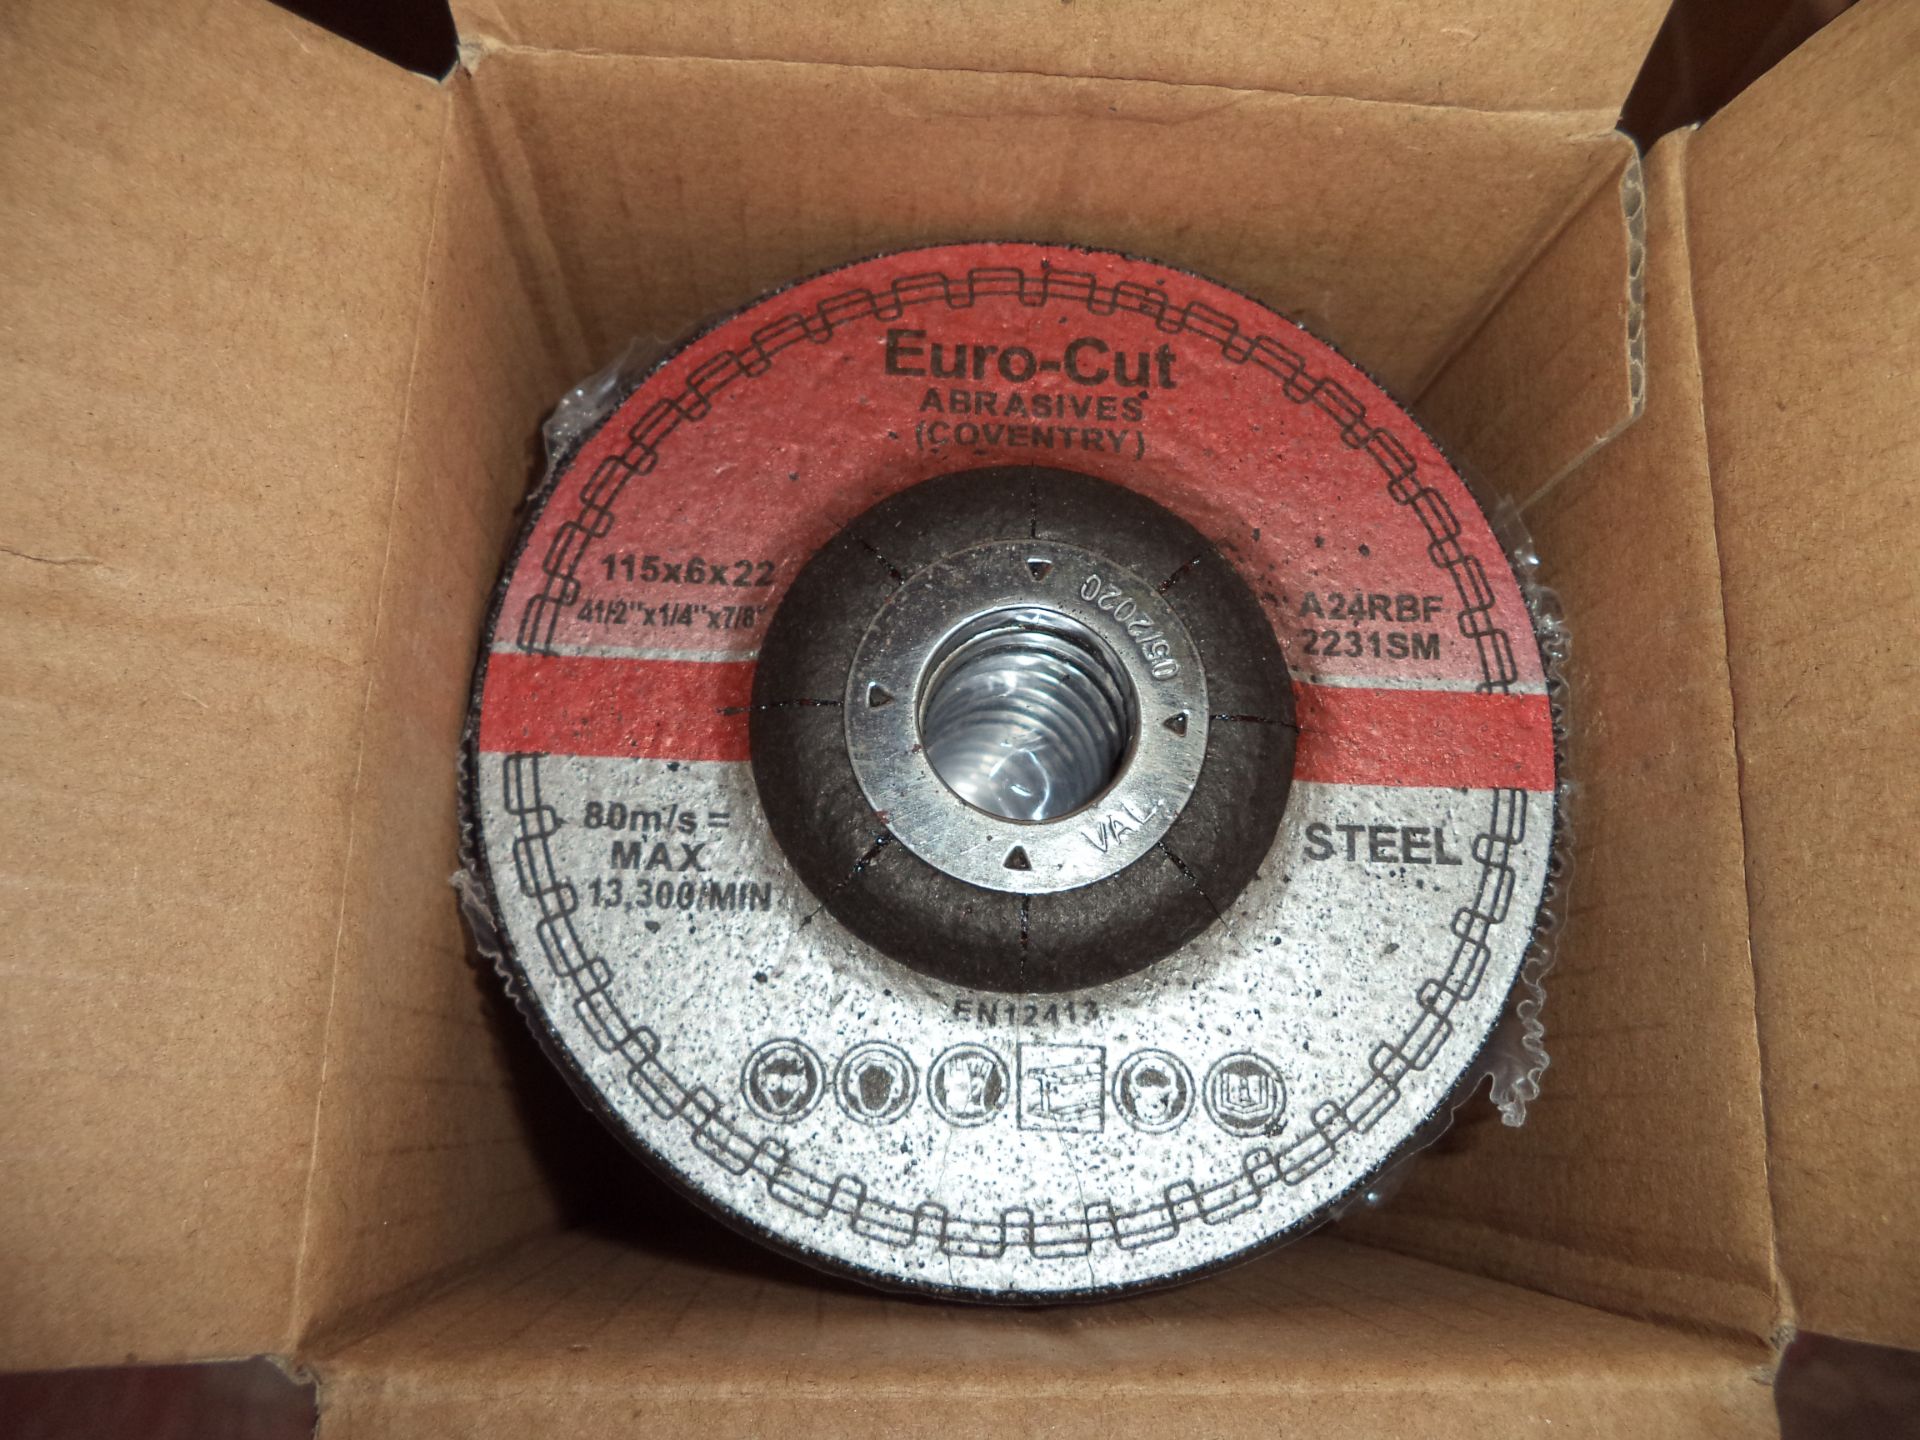 72 off Euro-cut Abrasives 115 x 6 x 22 steel discs IMPORTANT: Please remember goods successfully bid - Image 2 of 2